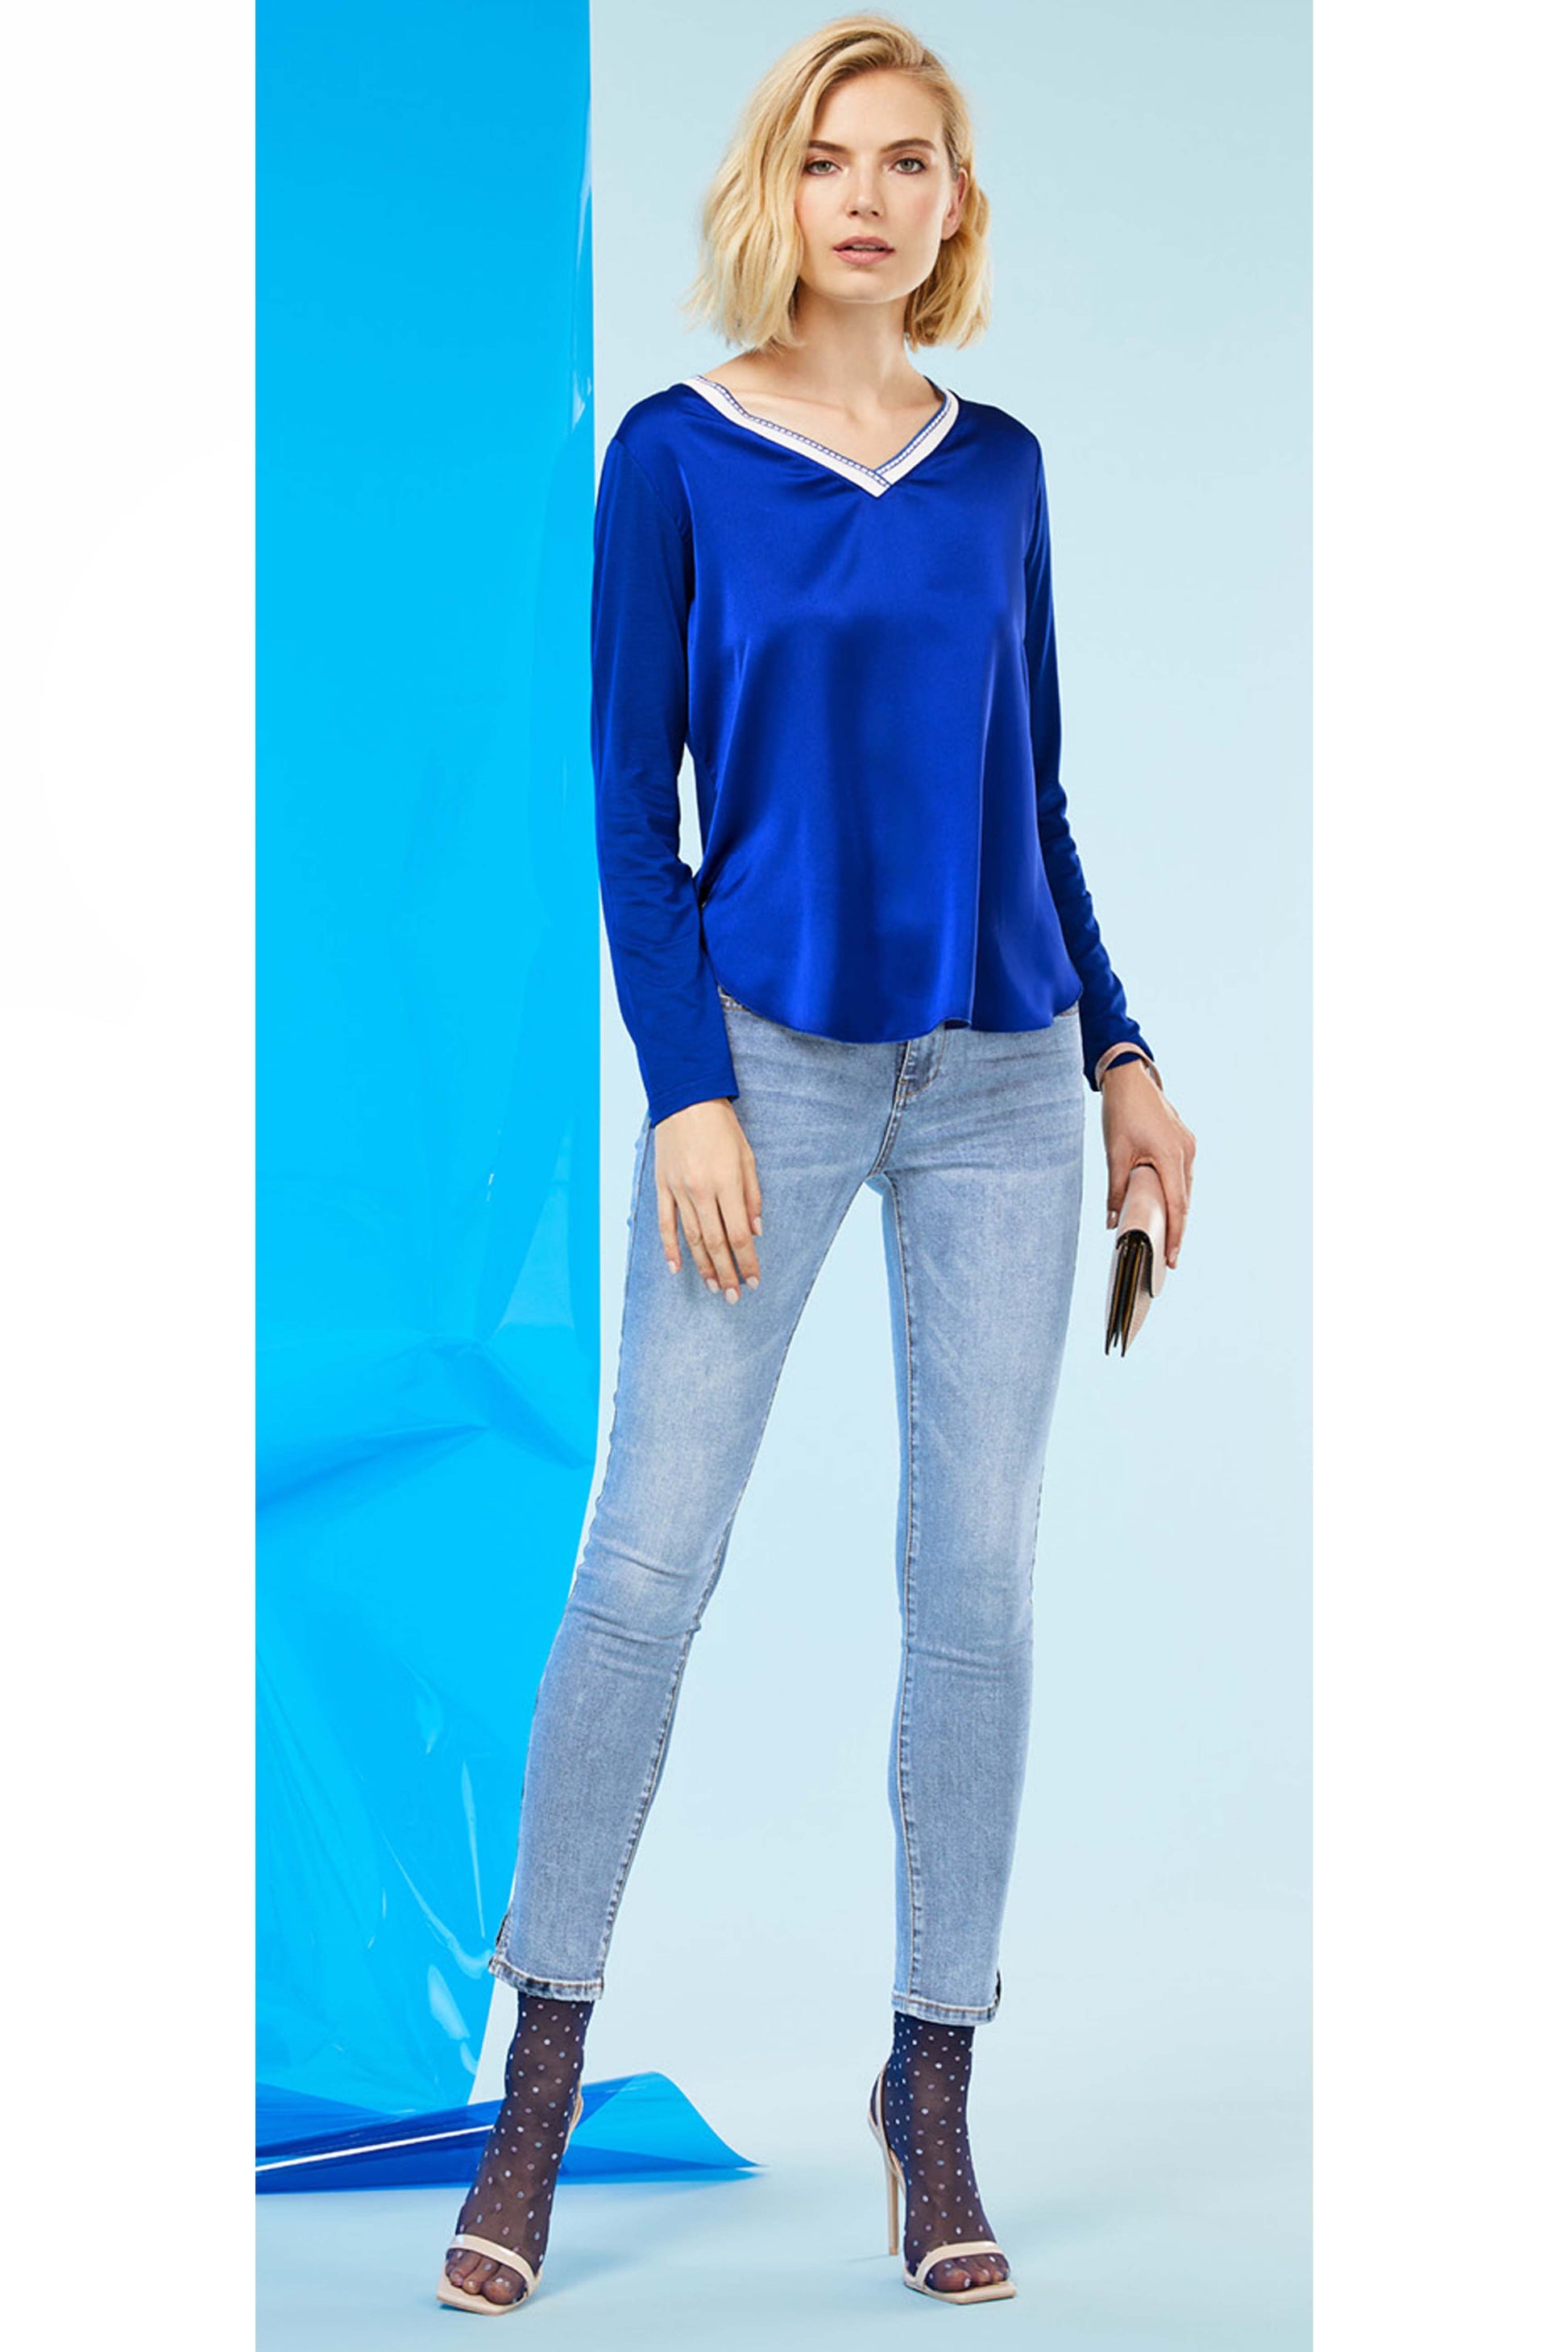 SiSi Look Me Jeggings - High rise soft cotton jean leggings (jeggings) in light denim blue with button and fly zip closures, front and back pockets, belt loops and side slits on the cuffs. Worn with a blue satin v-neck blouse and sheer navy spot ankle socks.